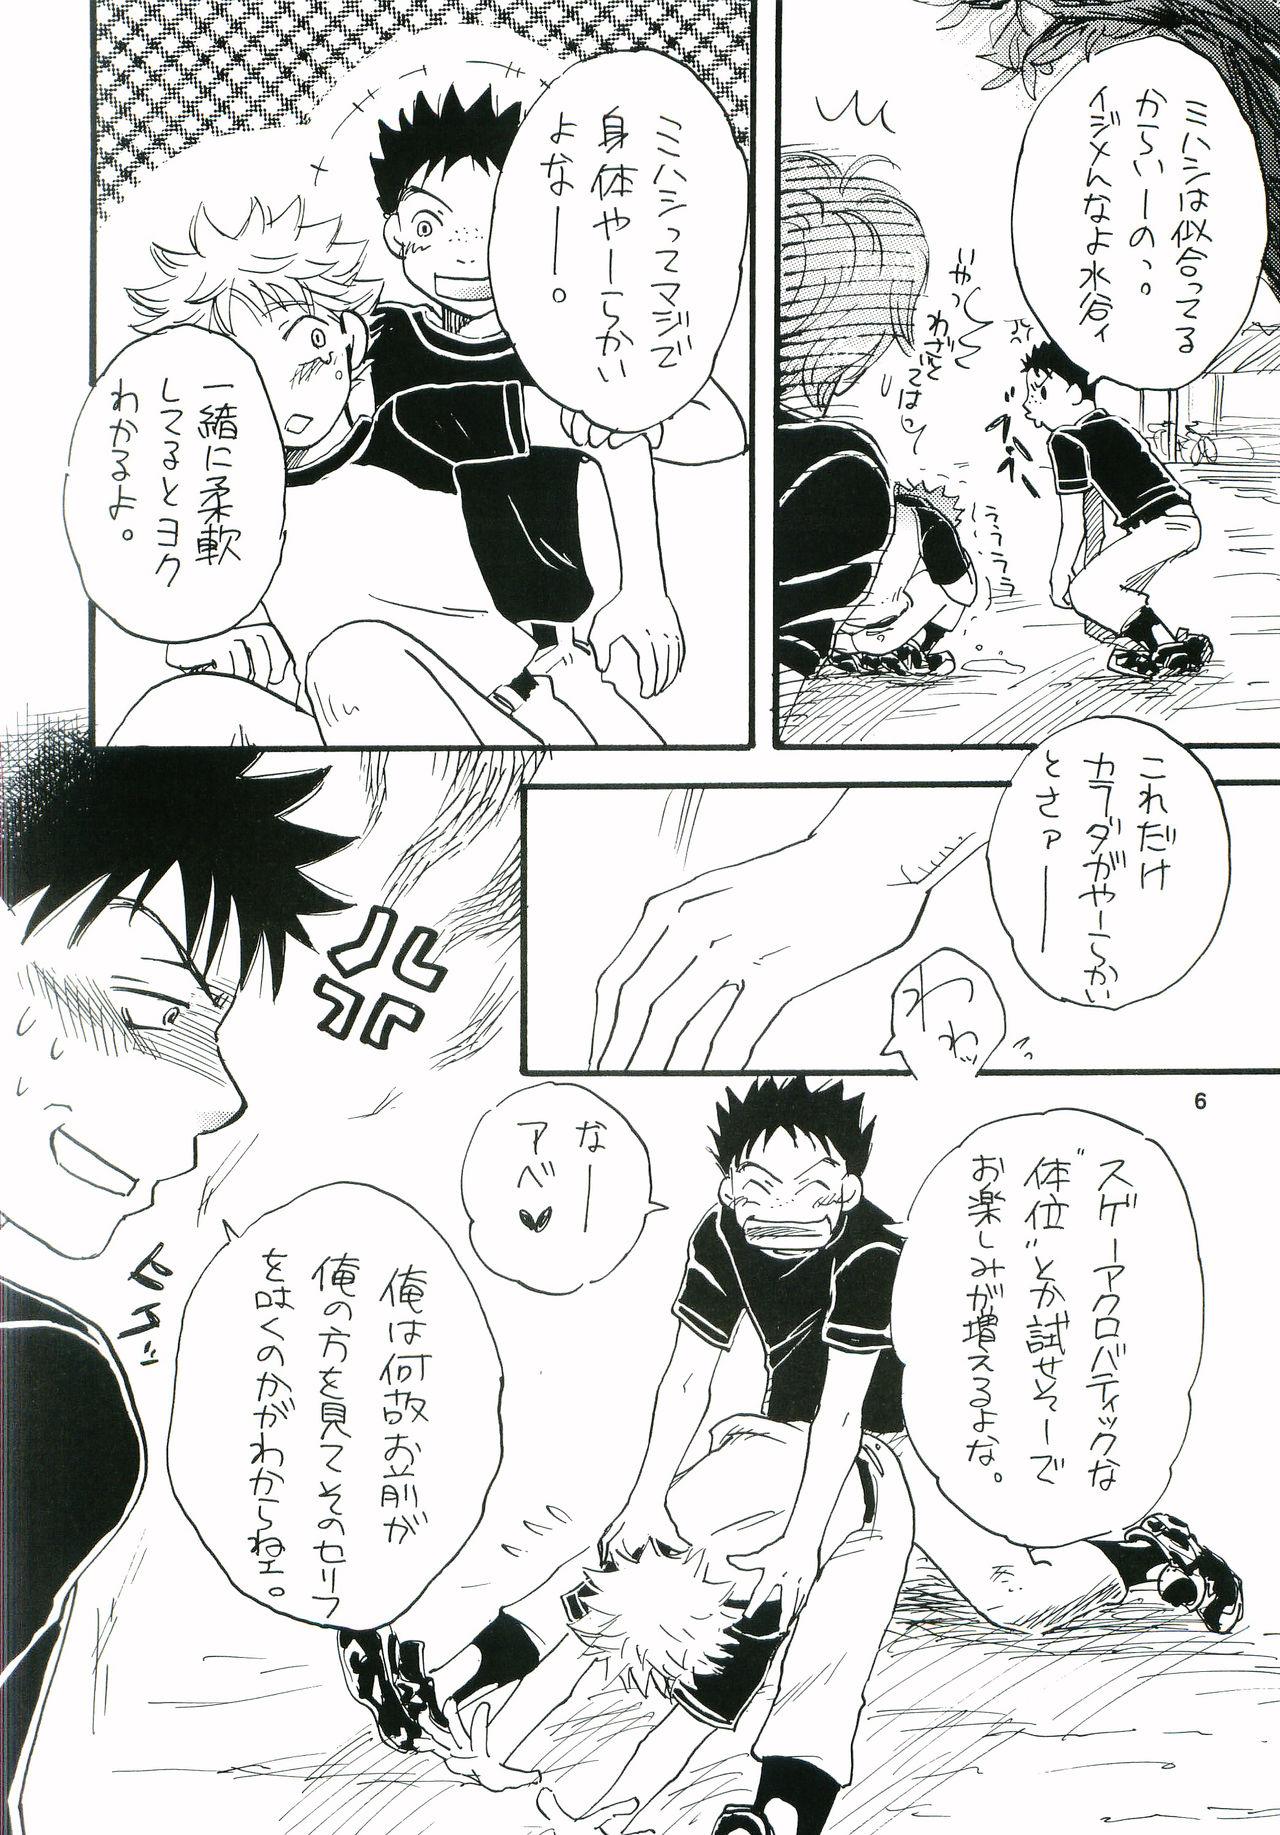 Blowing Honto no Ace Number o Kimi ni. - Ookiku furikabutte Muscle - Page 5